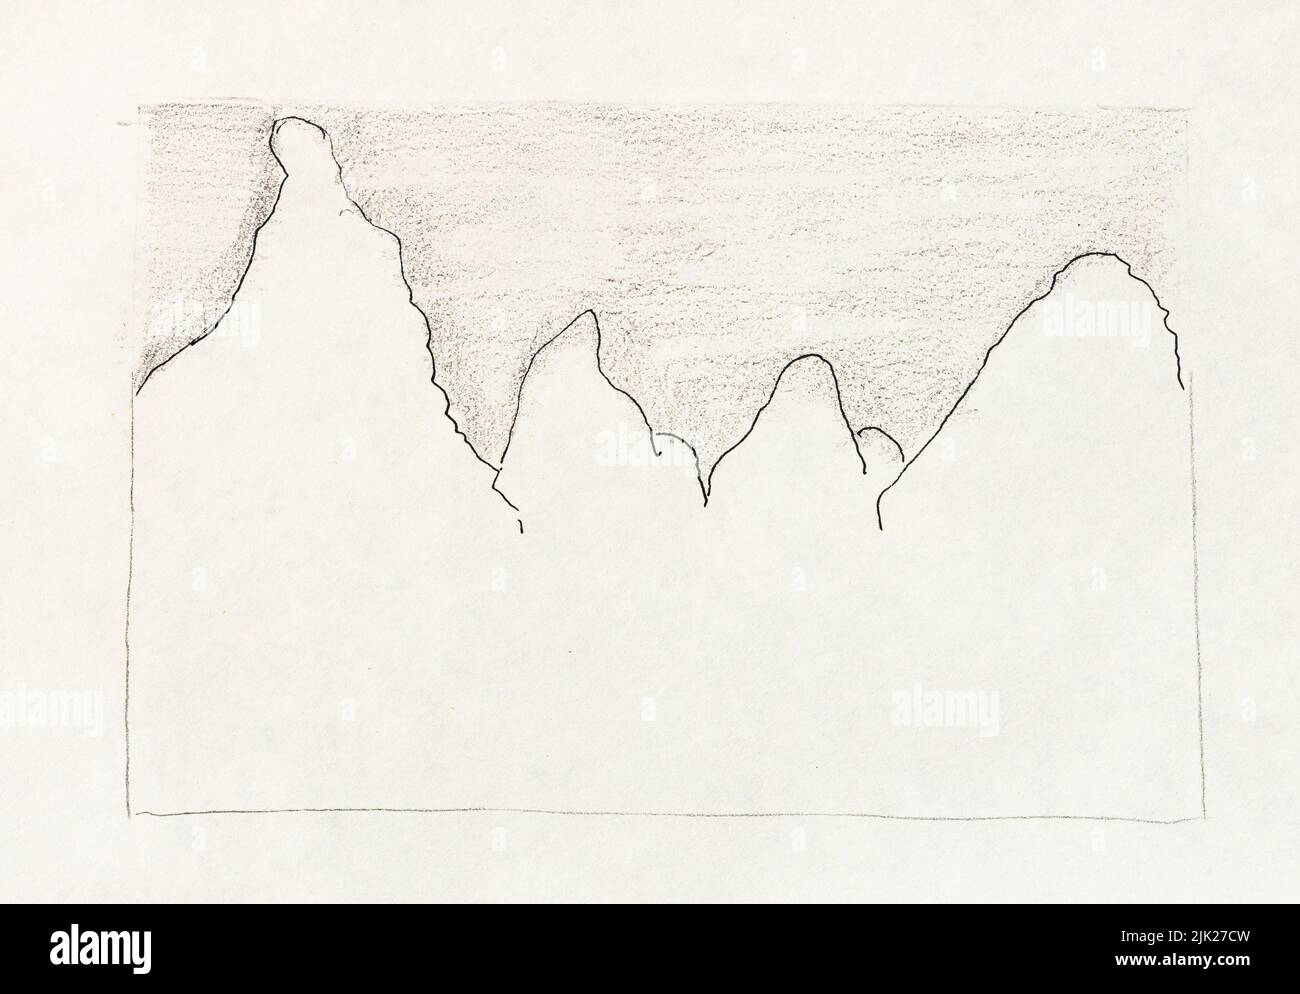 outline sketch of karst peaks in Yangshuo County China under black sky in hand-drawn with black pen and pencil on old white textured paper Stock Photo